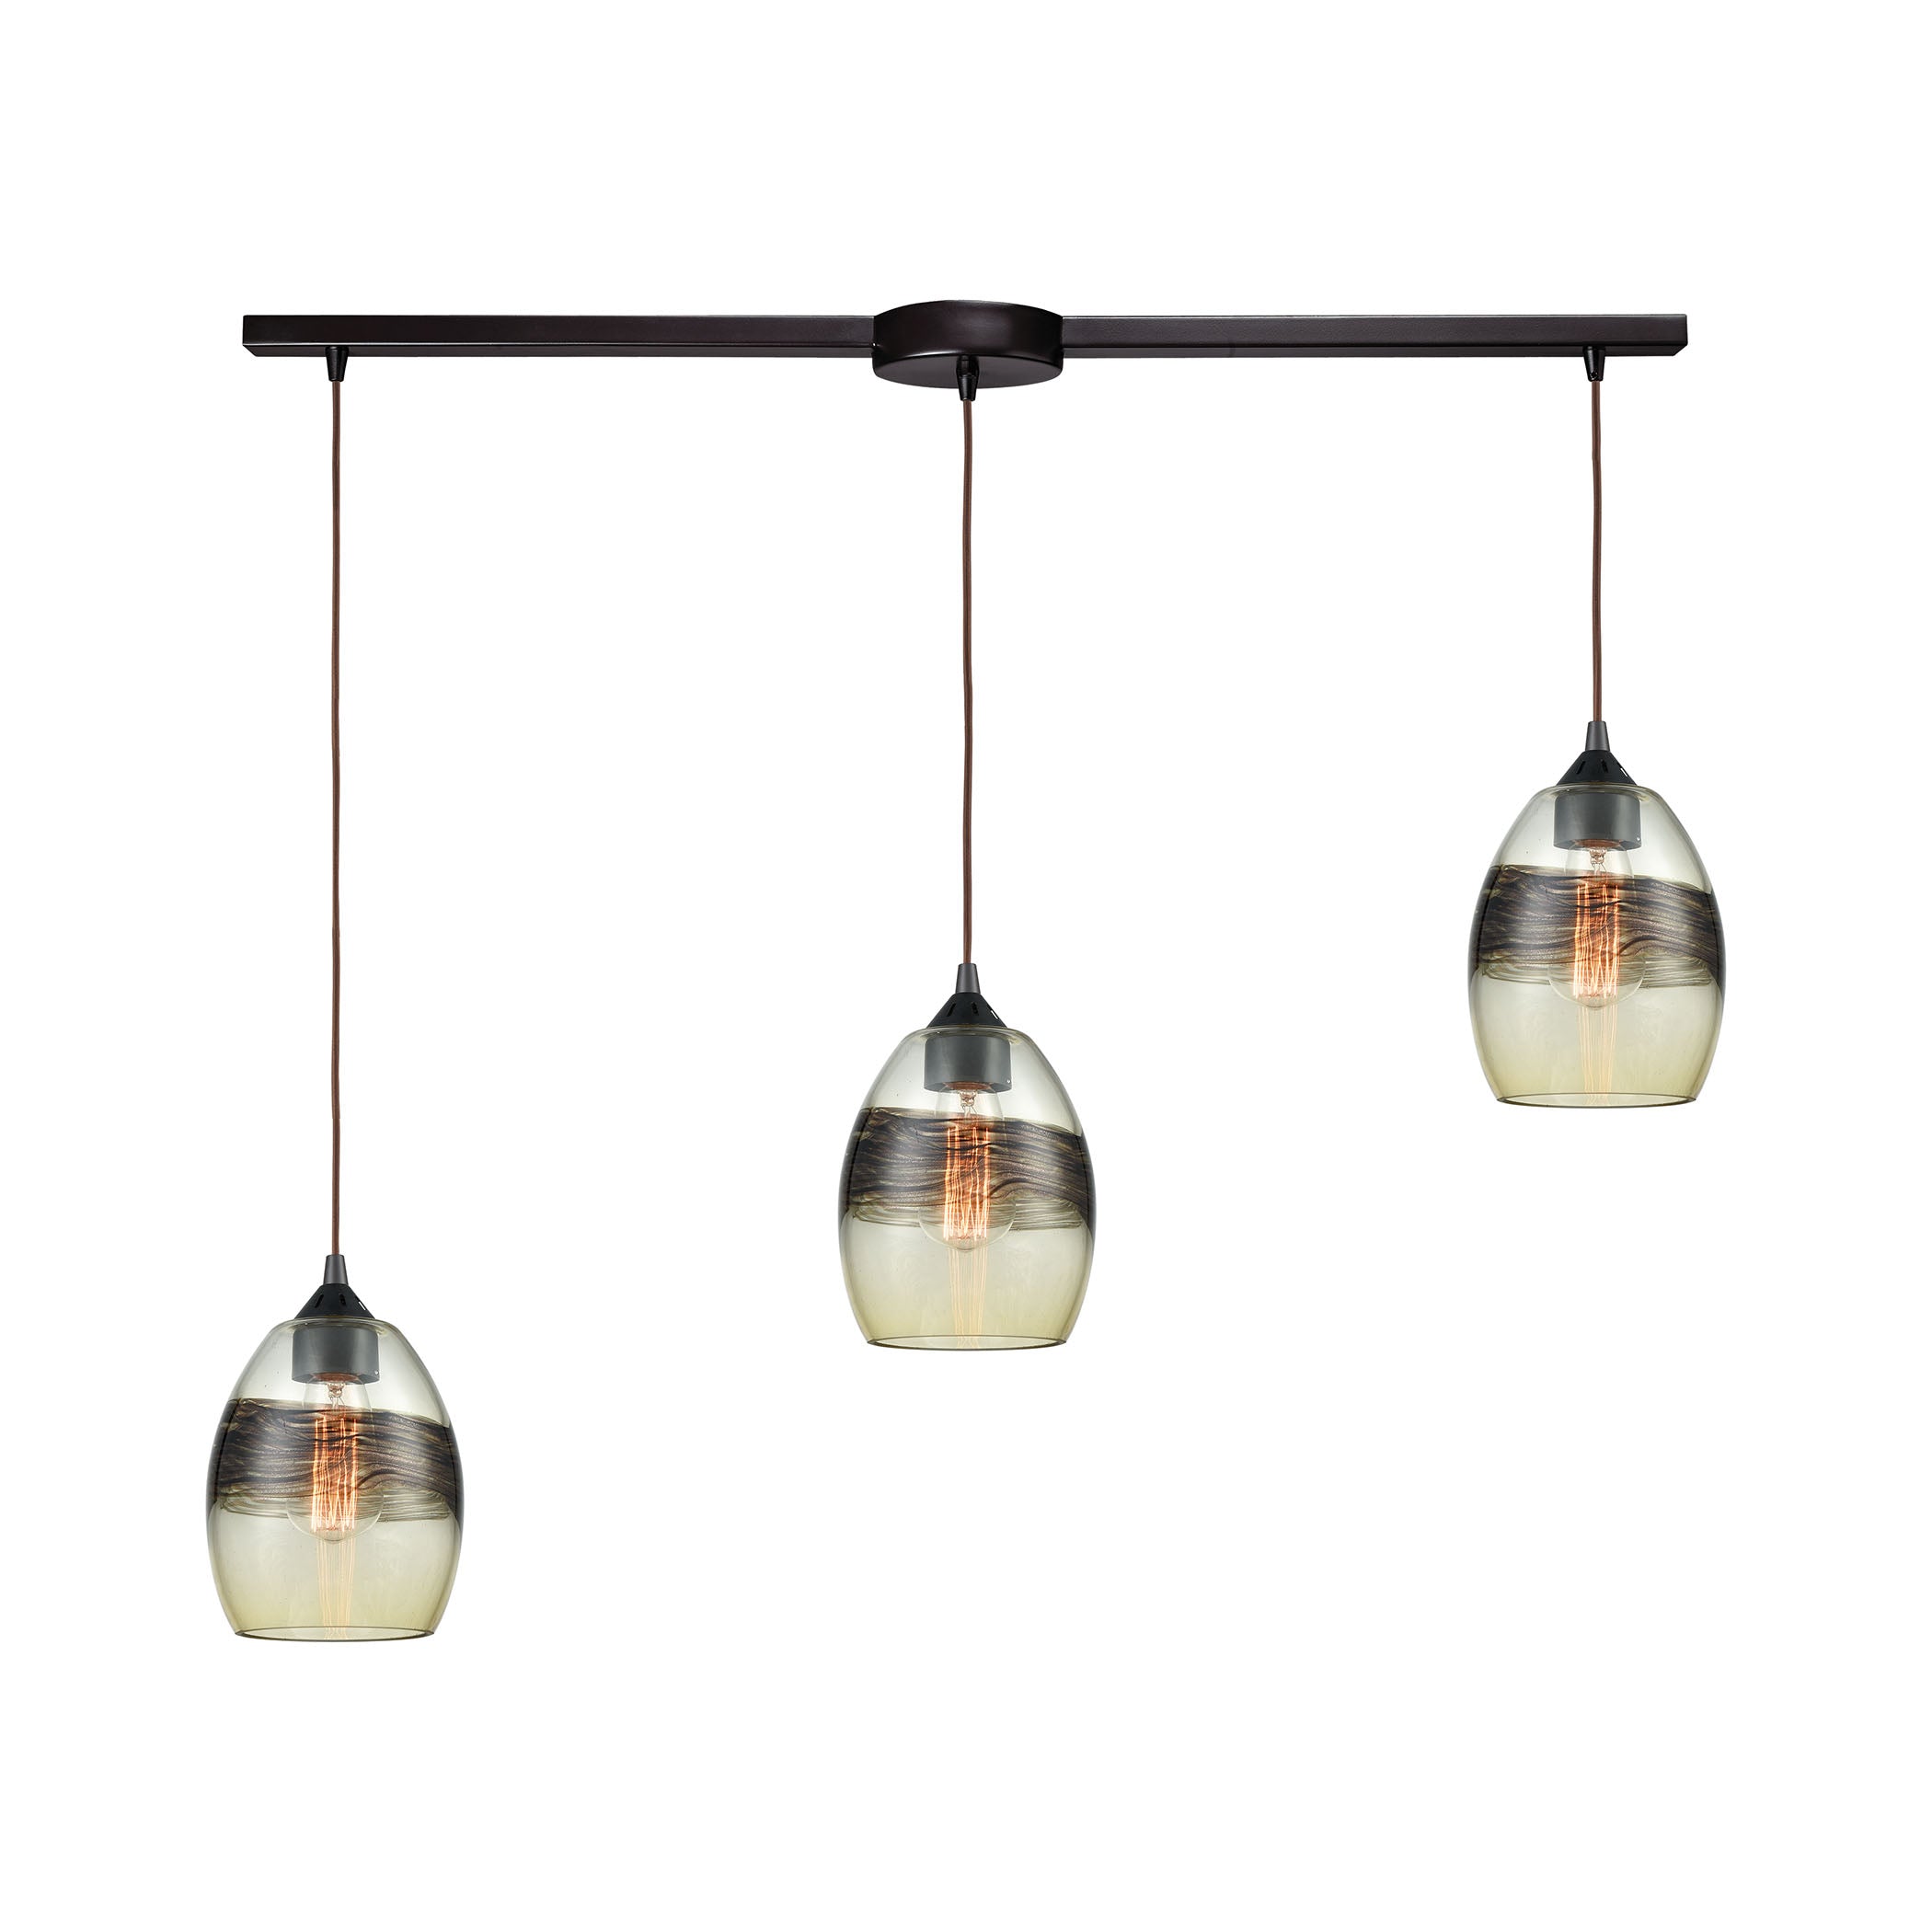 ELK Lighting 25122/3L Whisp 3-Light Linear Mini Pendant Fixture in Oil Rubbed Bronze with Champagne-plated Glass